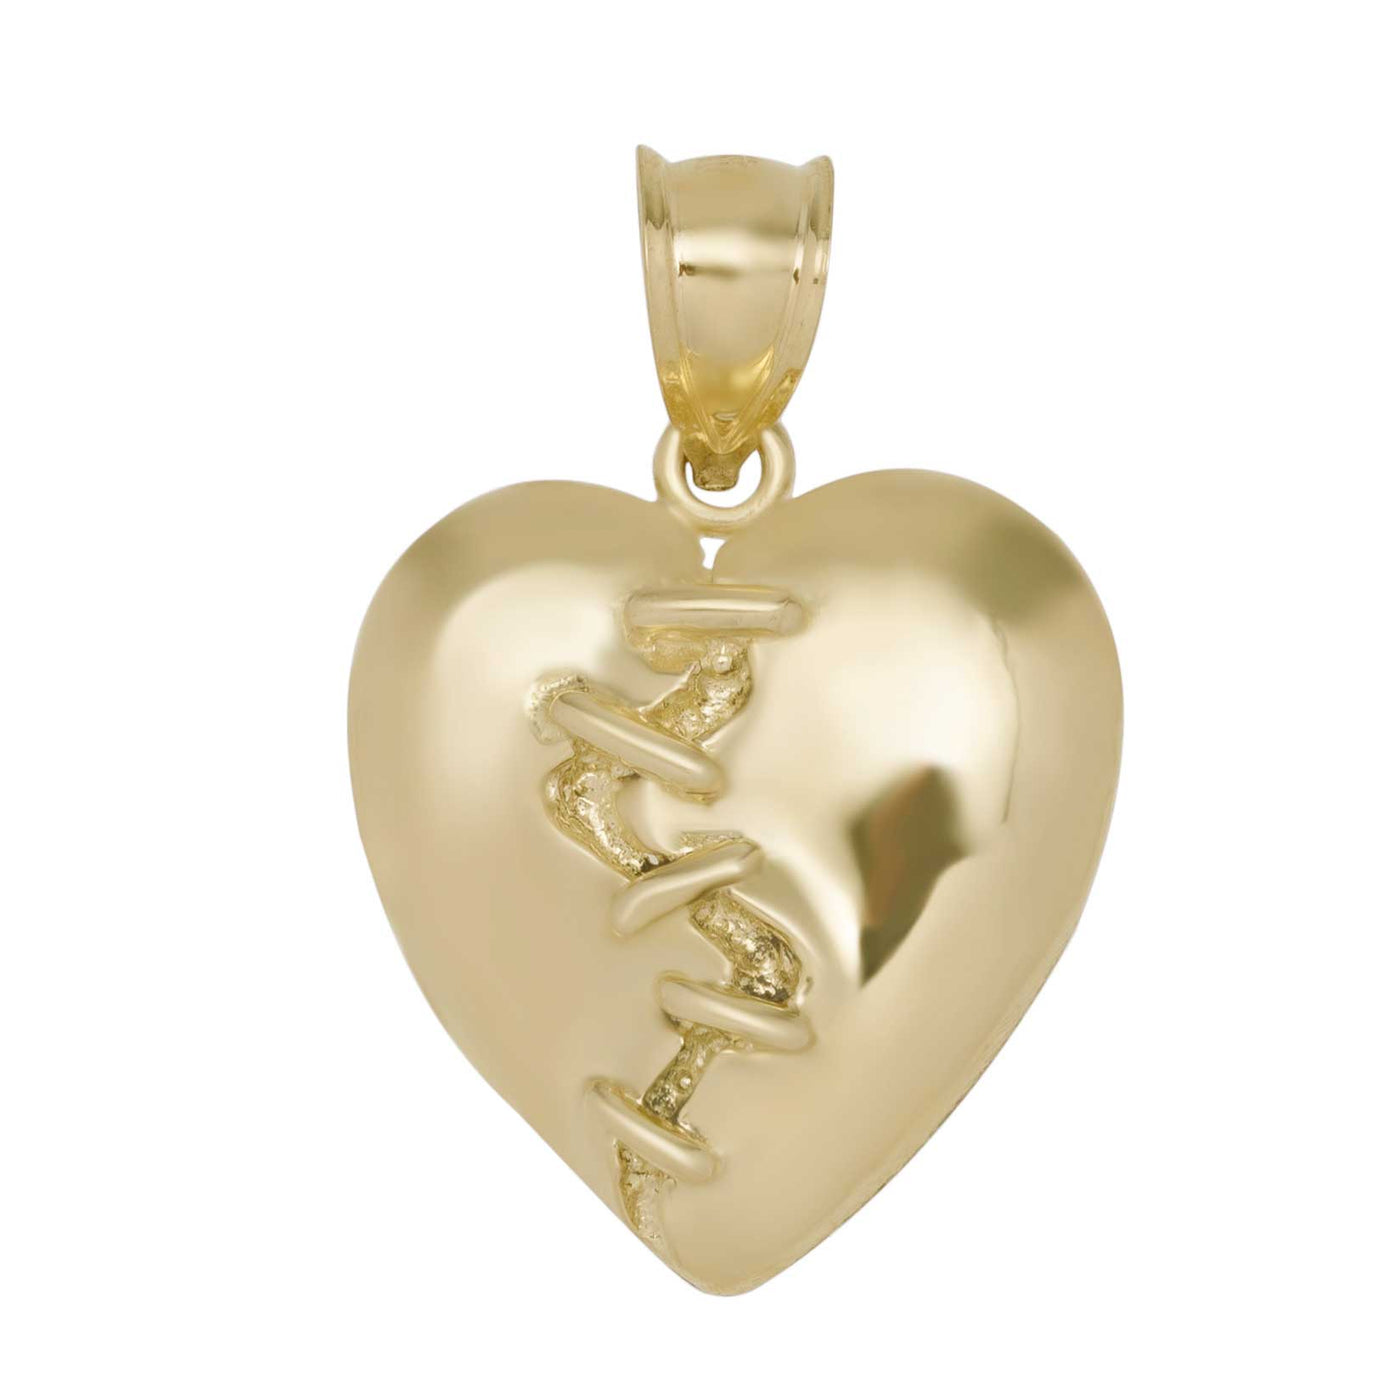 1 1/4" Stitched Heart Pendant Solid 10K Yellow Gold